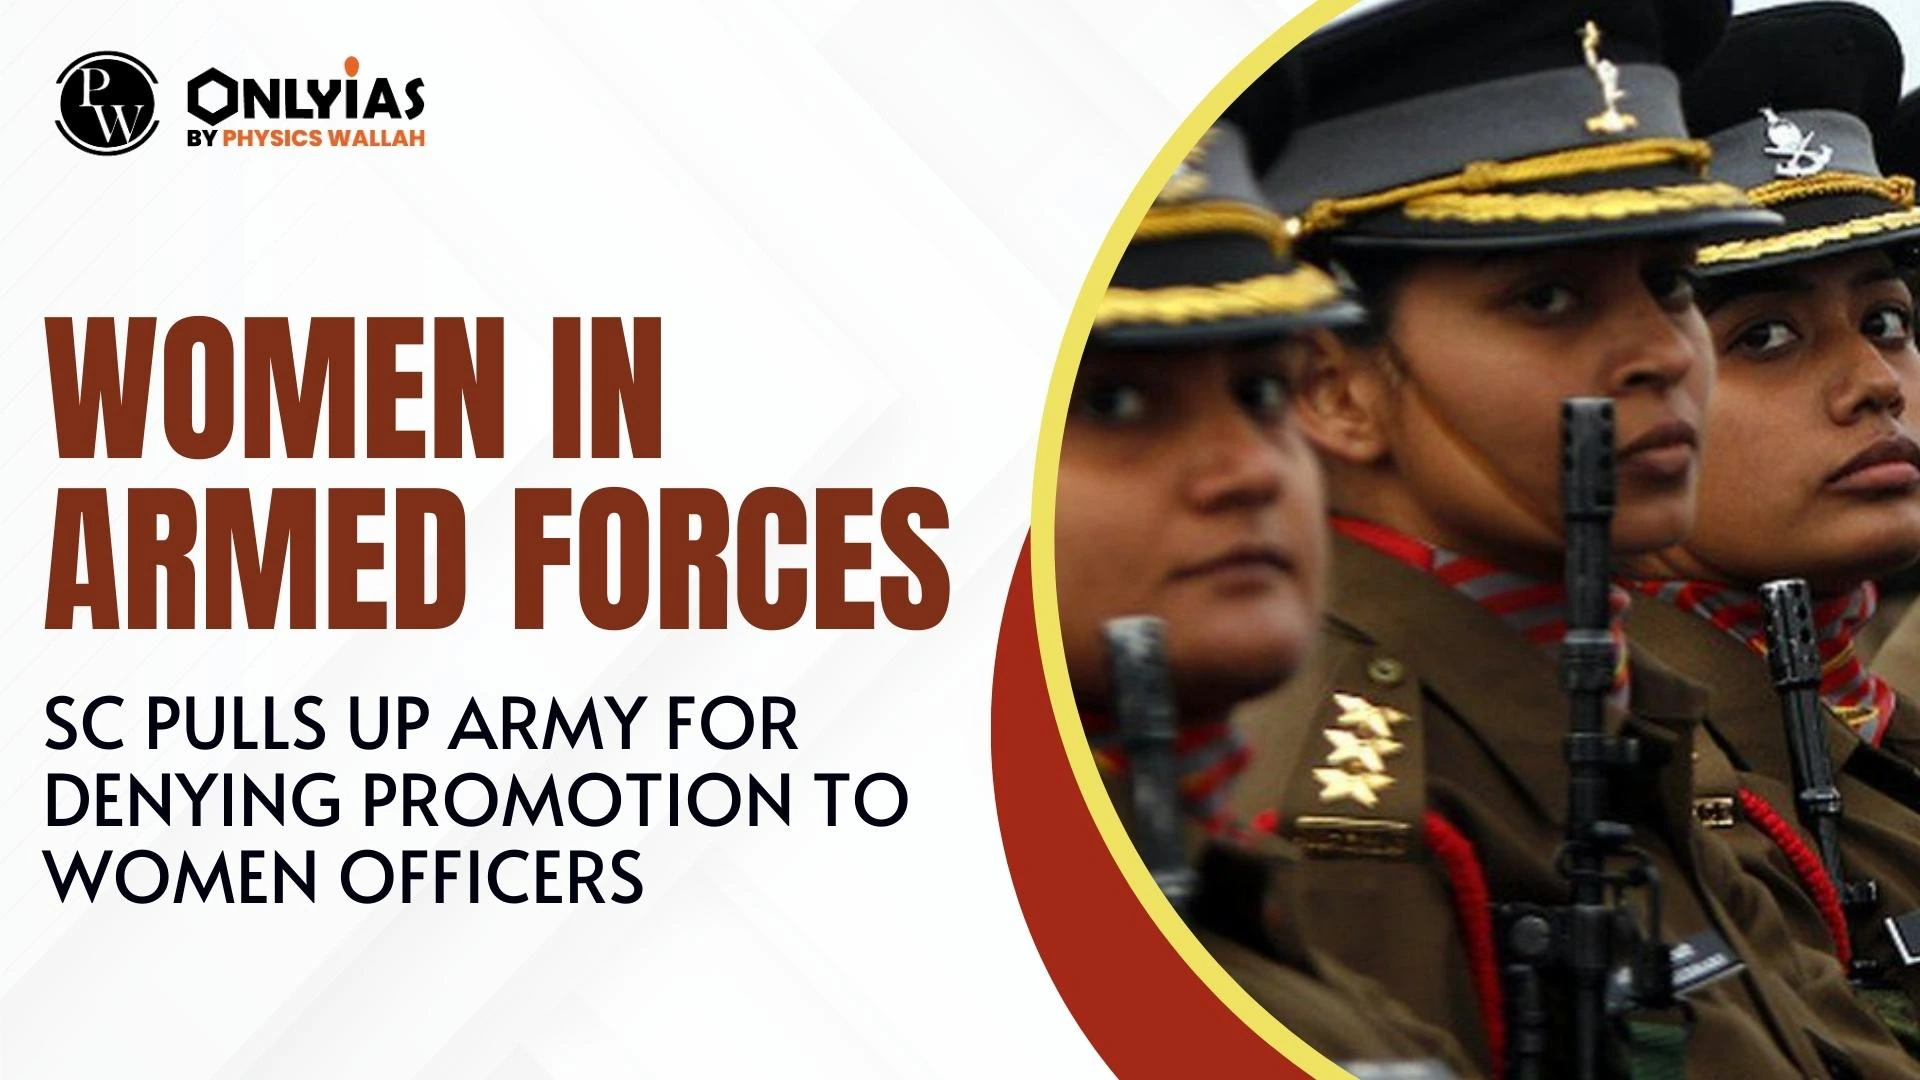 Women In Armed Forces - SC Pulls Up Army For Denying Promotion To Women  Officers - PWOnlyIAS